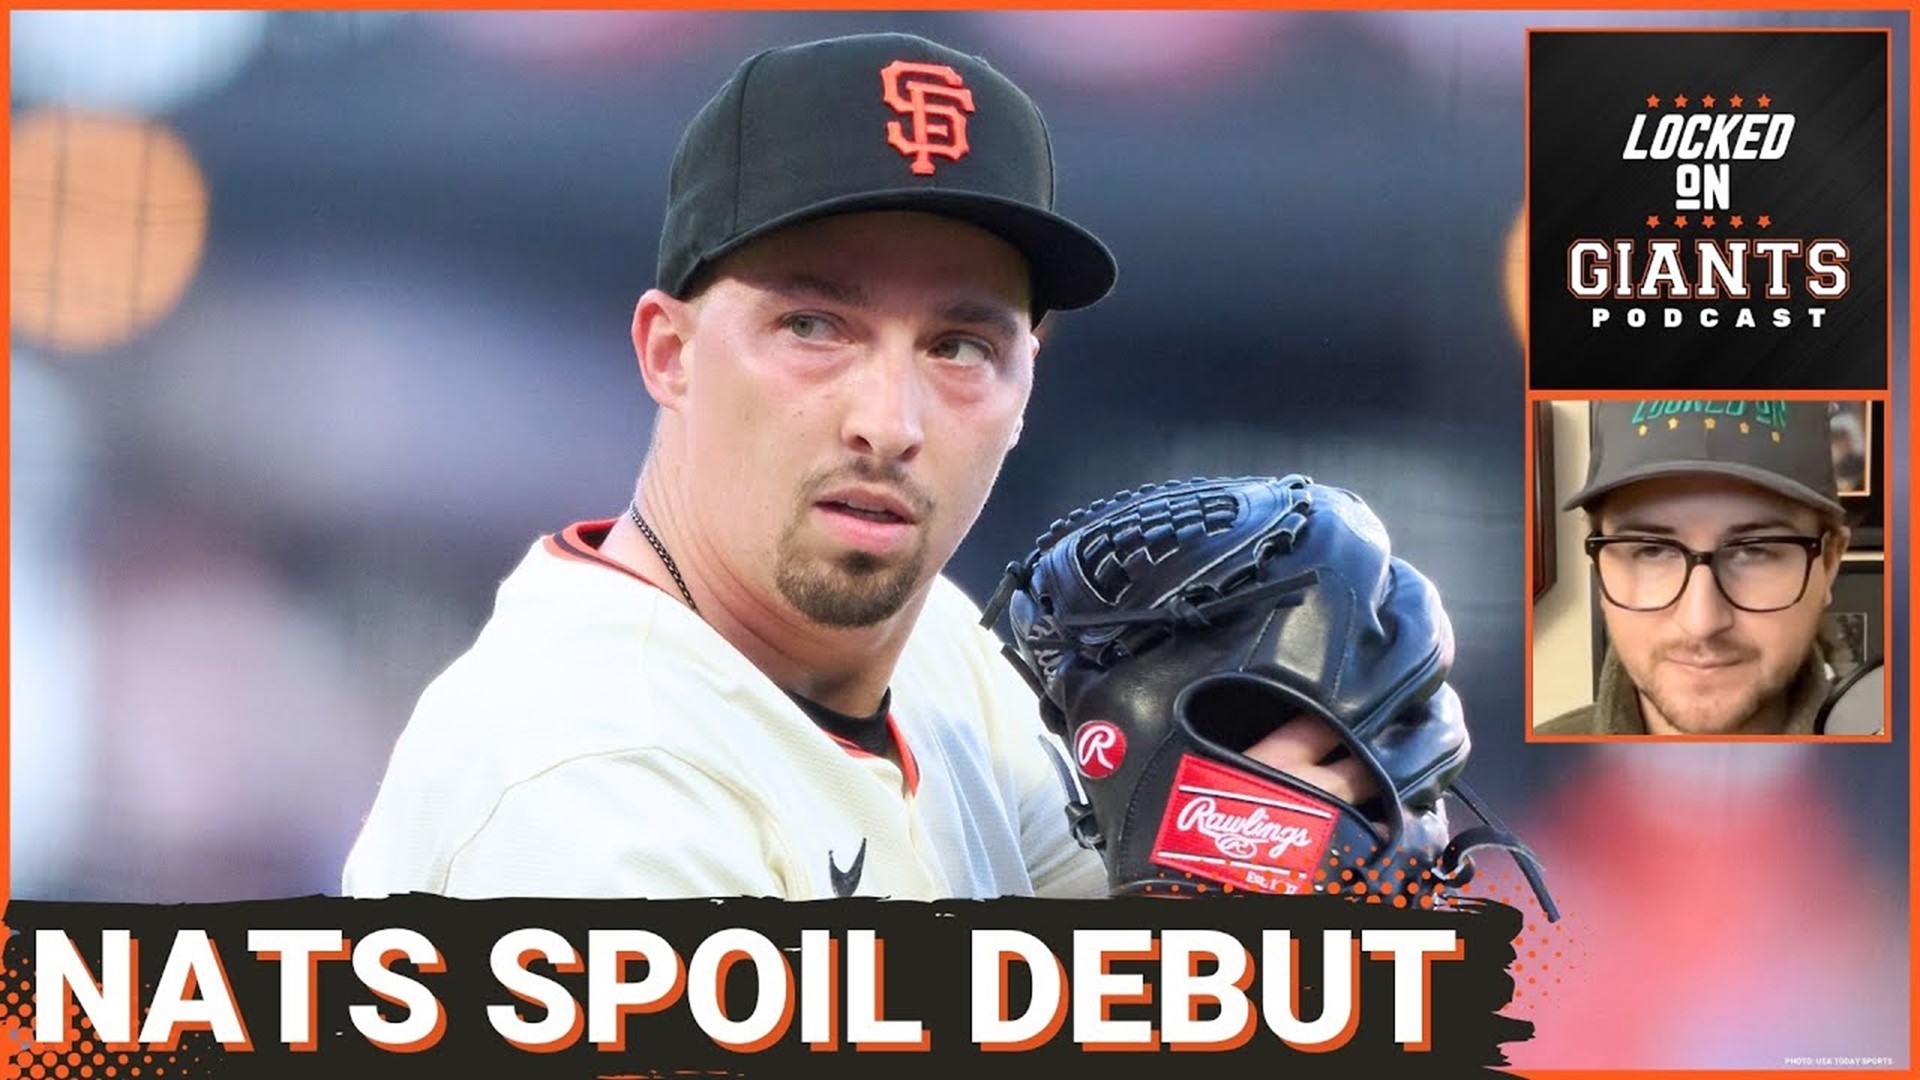 Blake Snell's SF Giants Debut Spoiled by Pesky Nats, Ice-Cold Bats